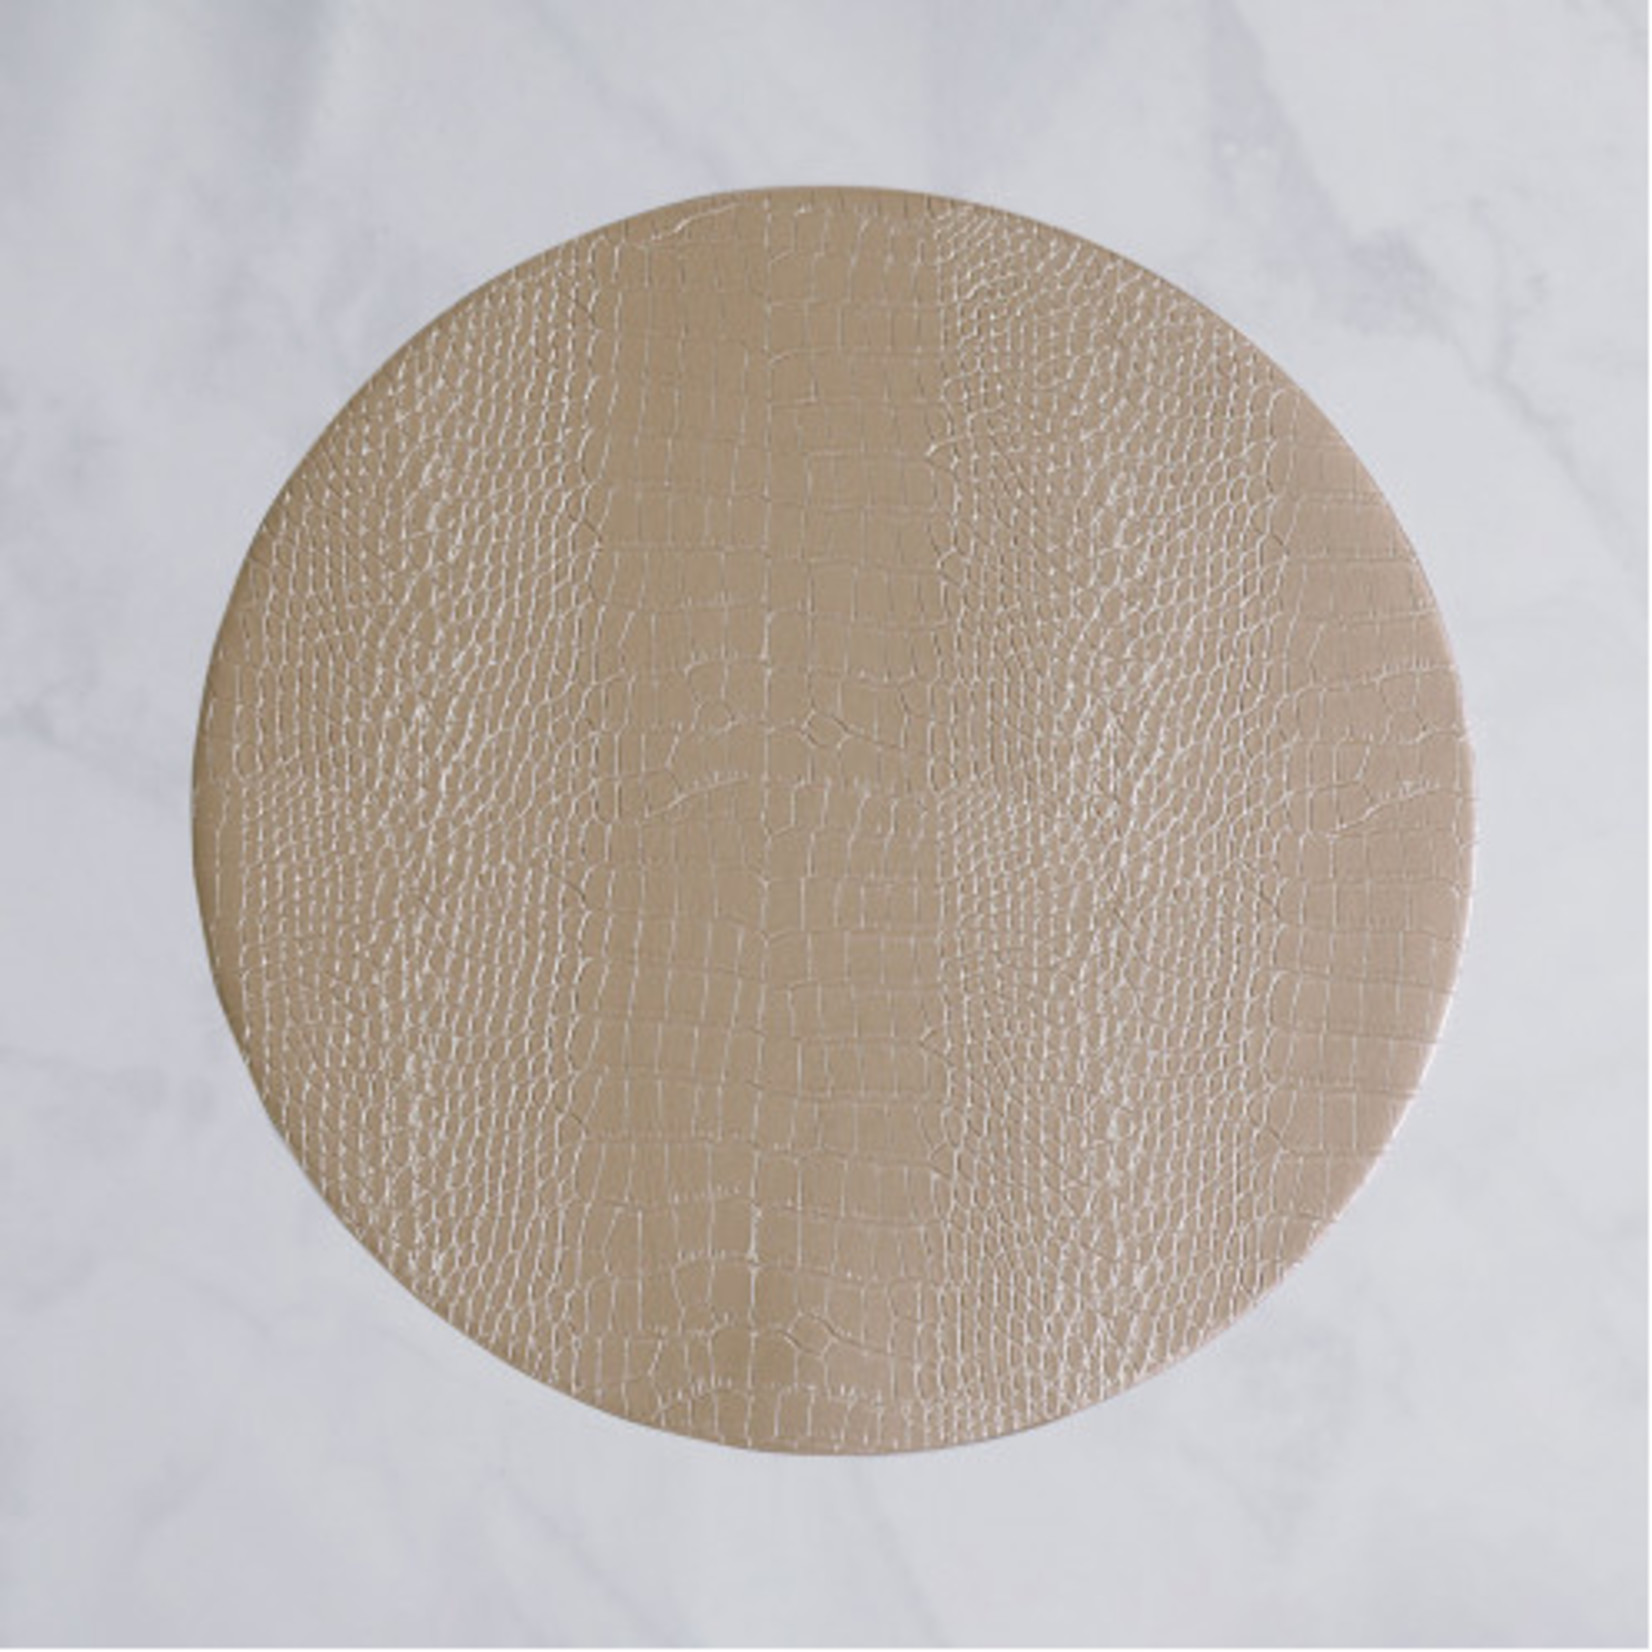 VIDA Croc Reversible 16 Round Place Mats S/4 (Silver and Gold)